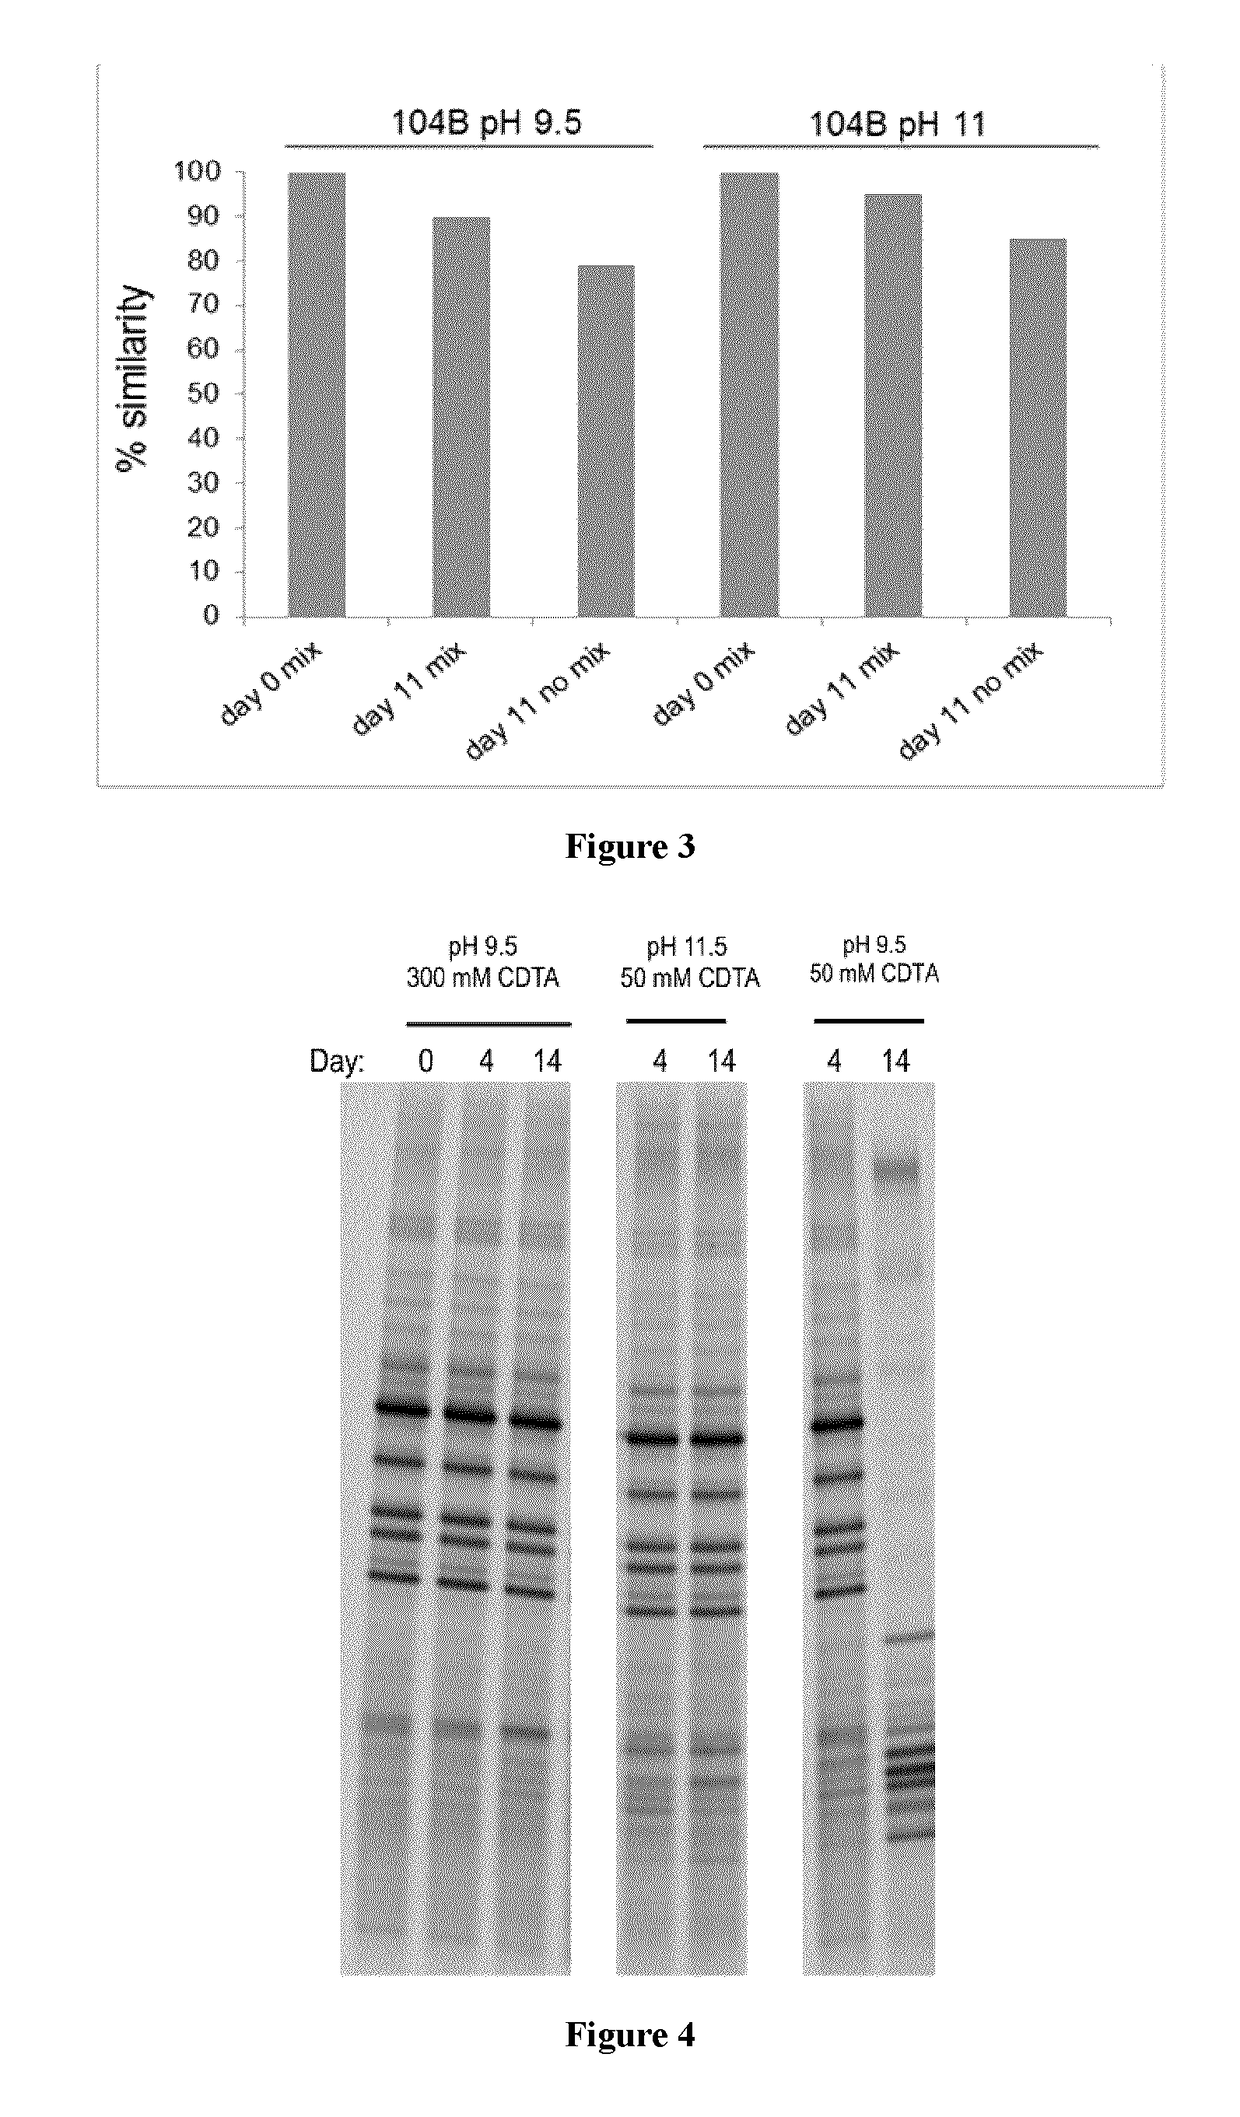 Composition and Method for Stabilizing Nucleic Acids in Biological Samples